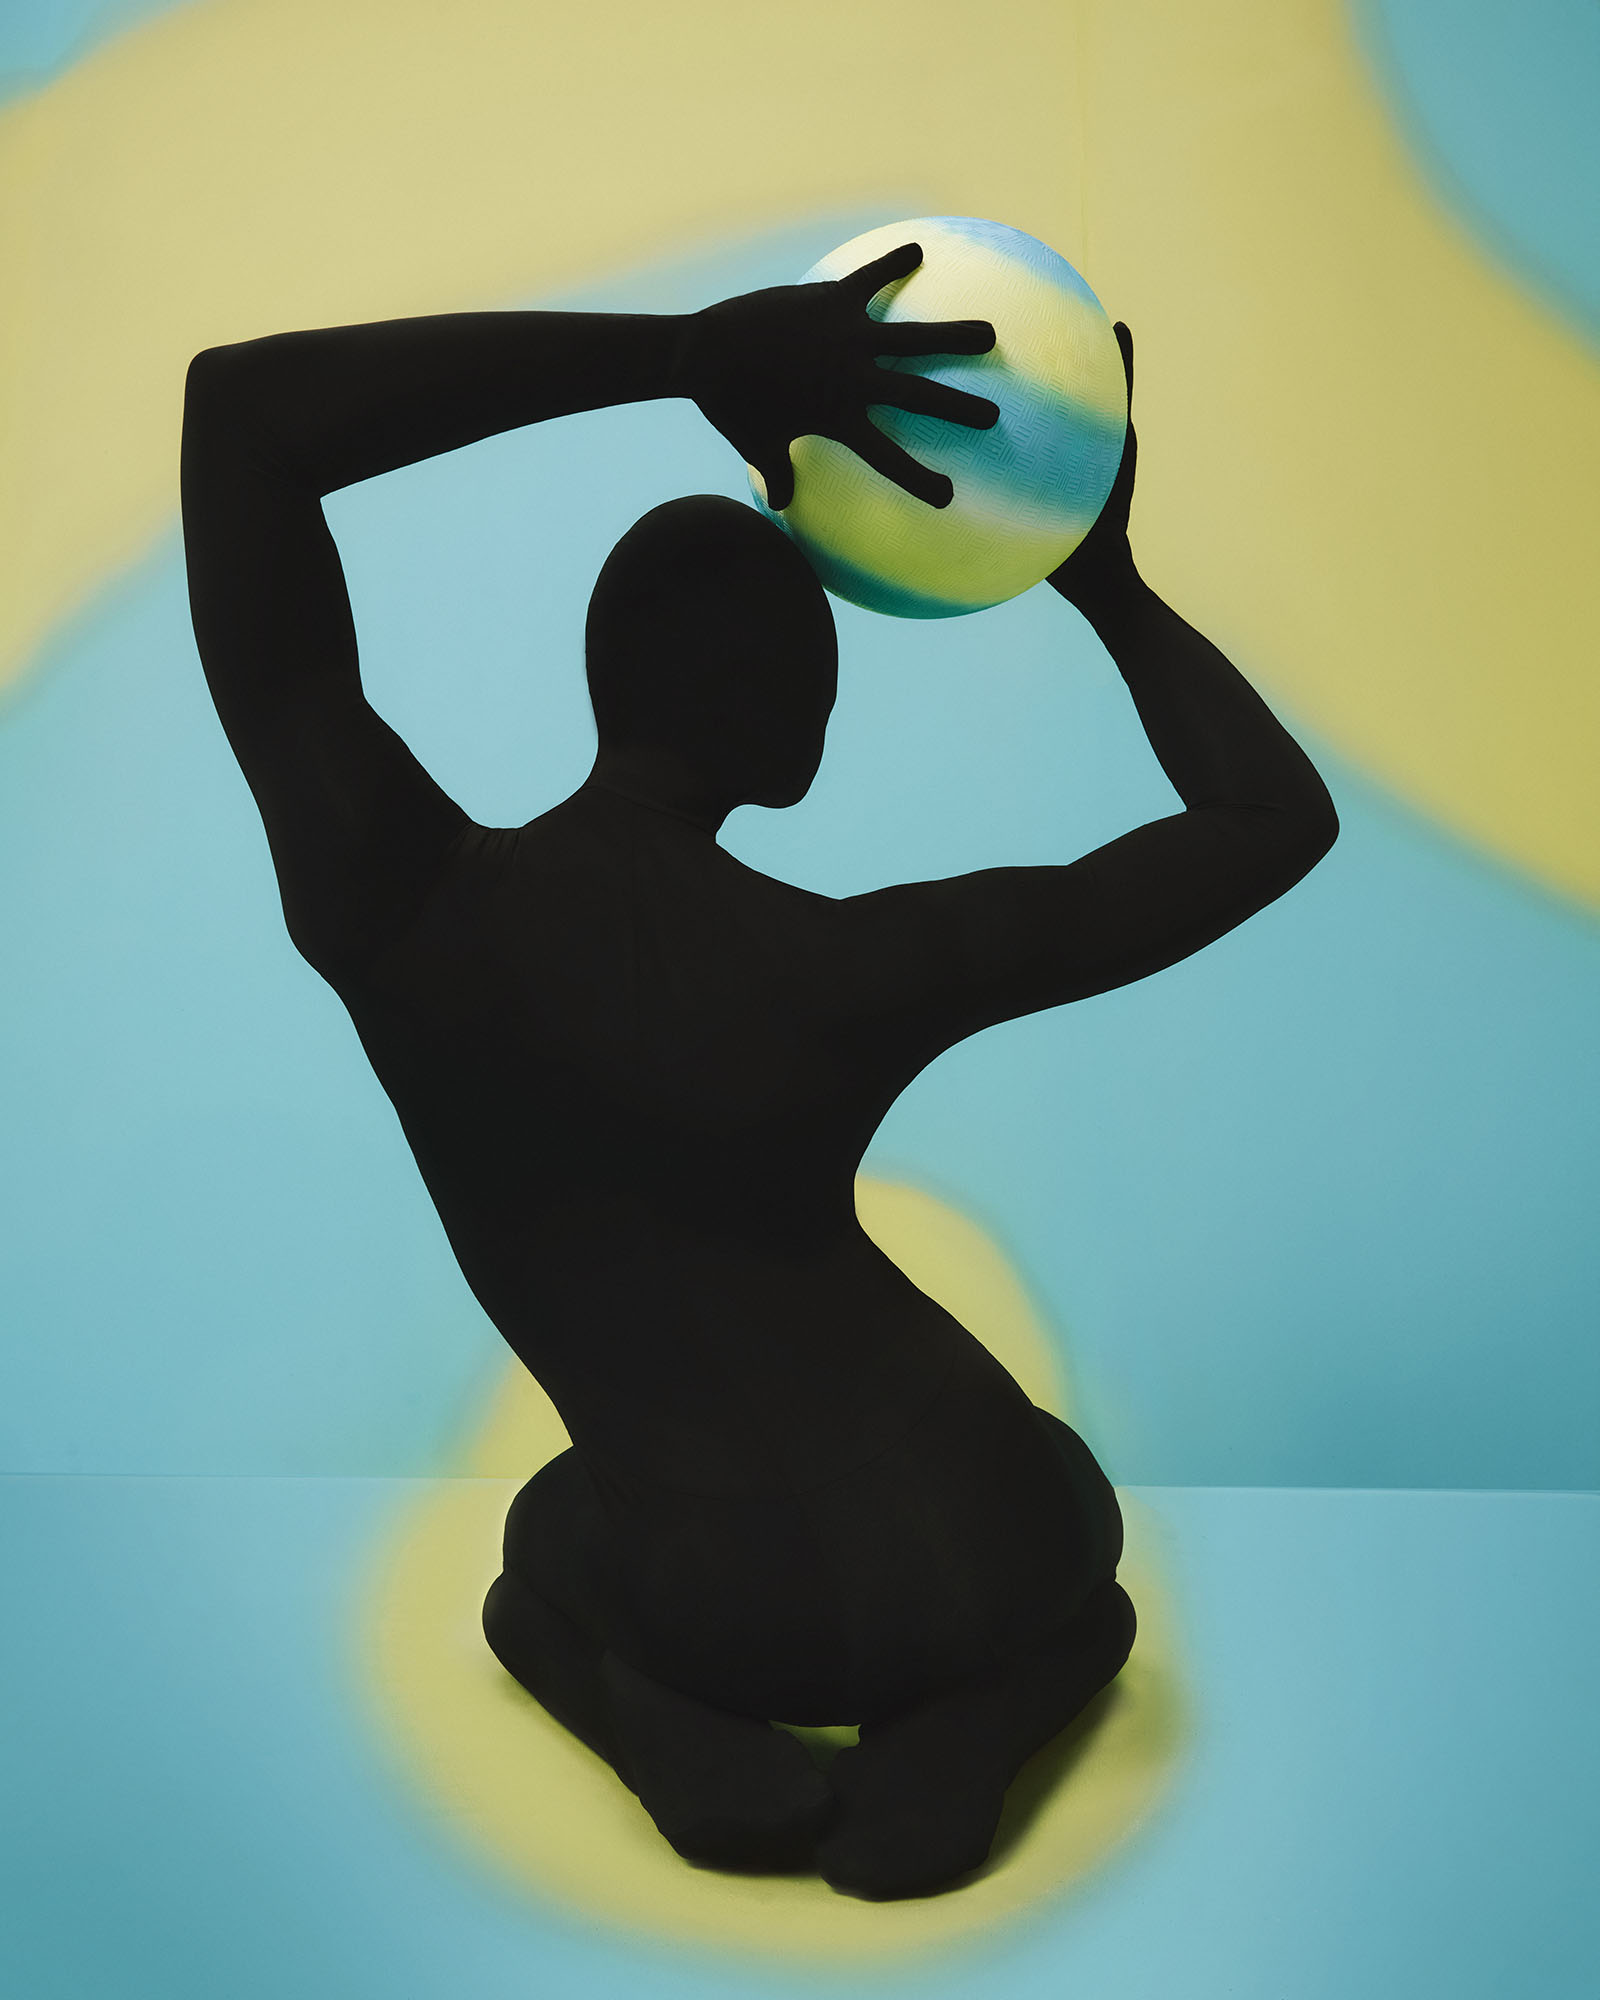 A silhouette holds a ball overhead.